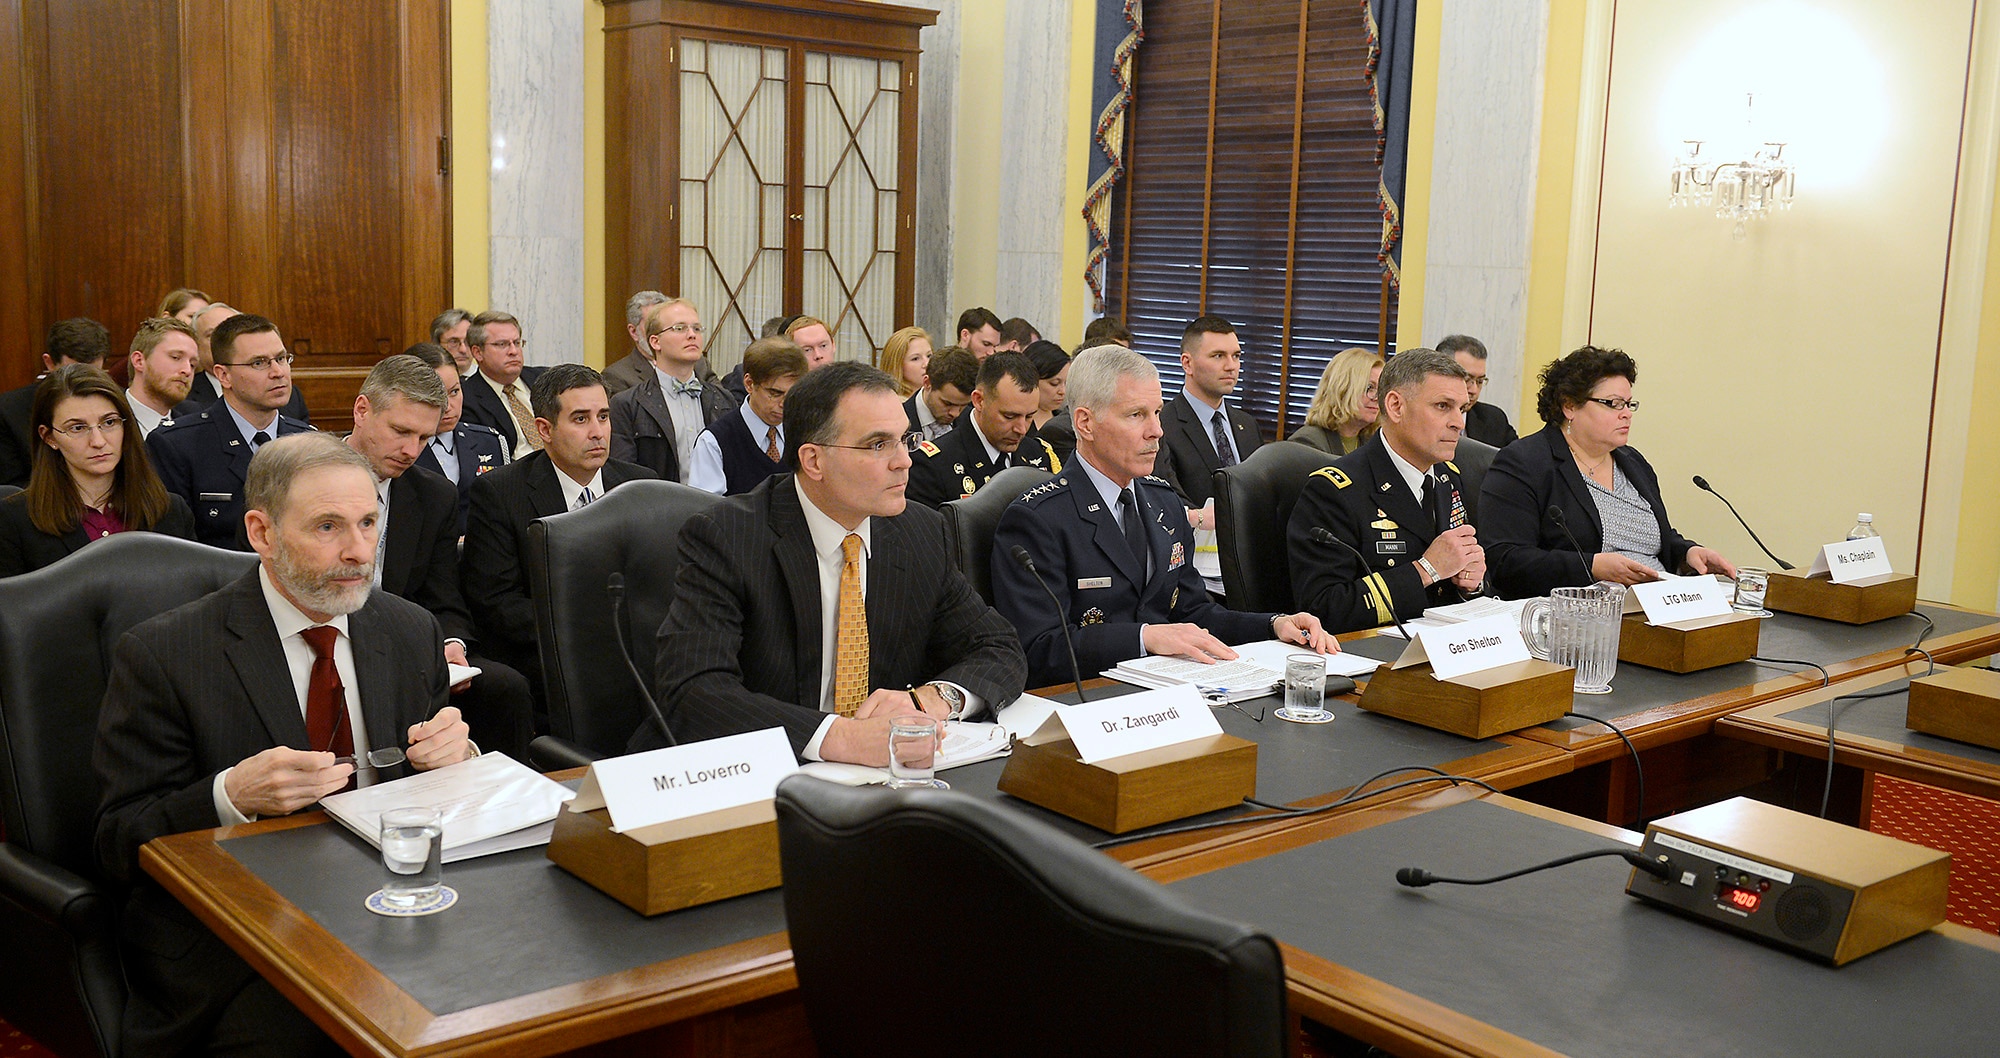 General William L. Shelton (center) testifies before the U.S. Senate Committee on Armed Services’ Subcommittee on Strategic Forces March 12, 2014, in Washington, D.C.  Shelton testified on military space programs in review of the defense authorization request for fiscal.  Shelton is the commander of Air Force Space Command. (U.S. Air Force photo/Scott M. Ash)